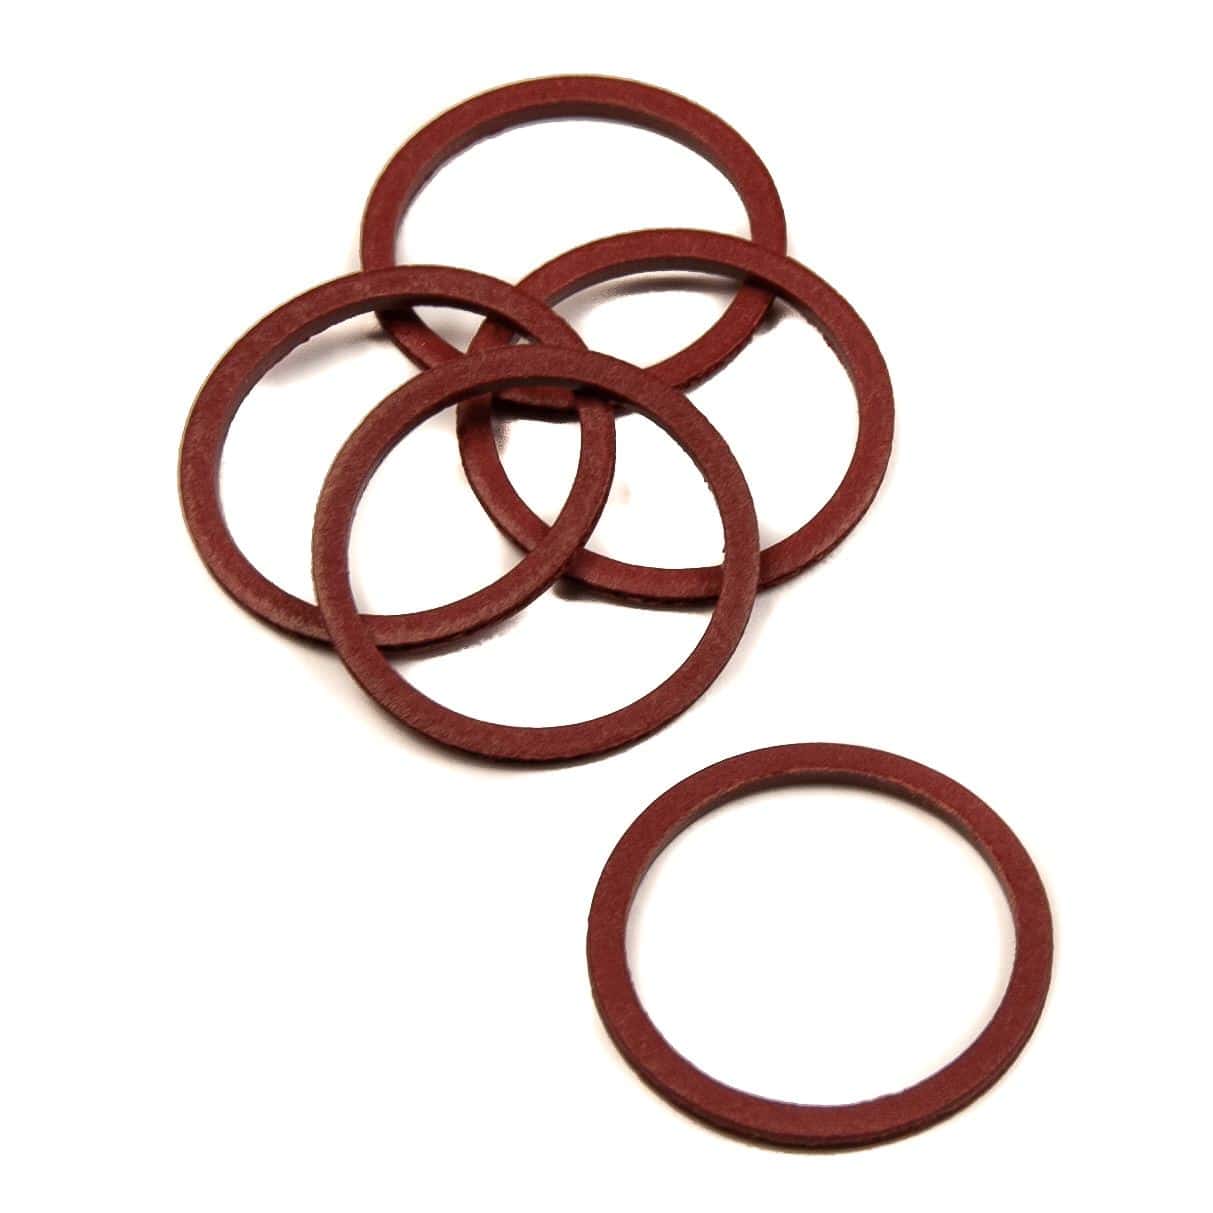 Fibre Washer for 3/4" BSP Tap Connectors, Washer is 23.88mm Diameter (Pack of 5) Tap Washers Thunderfix 100234